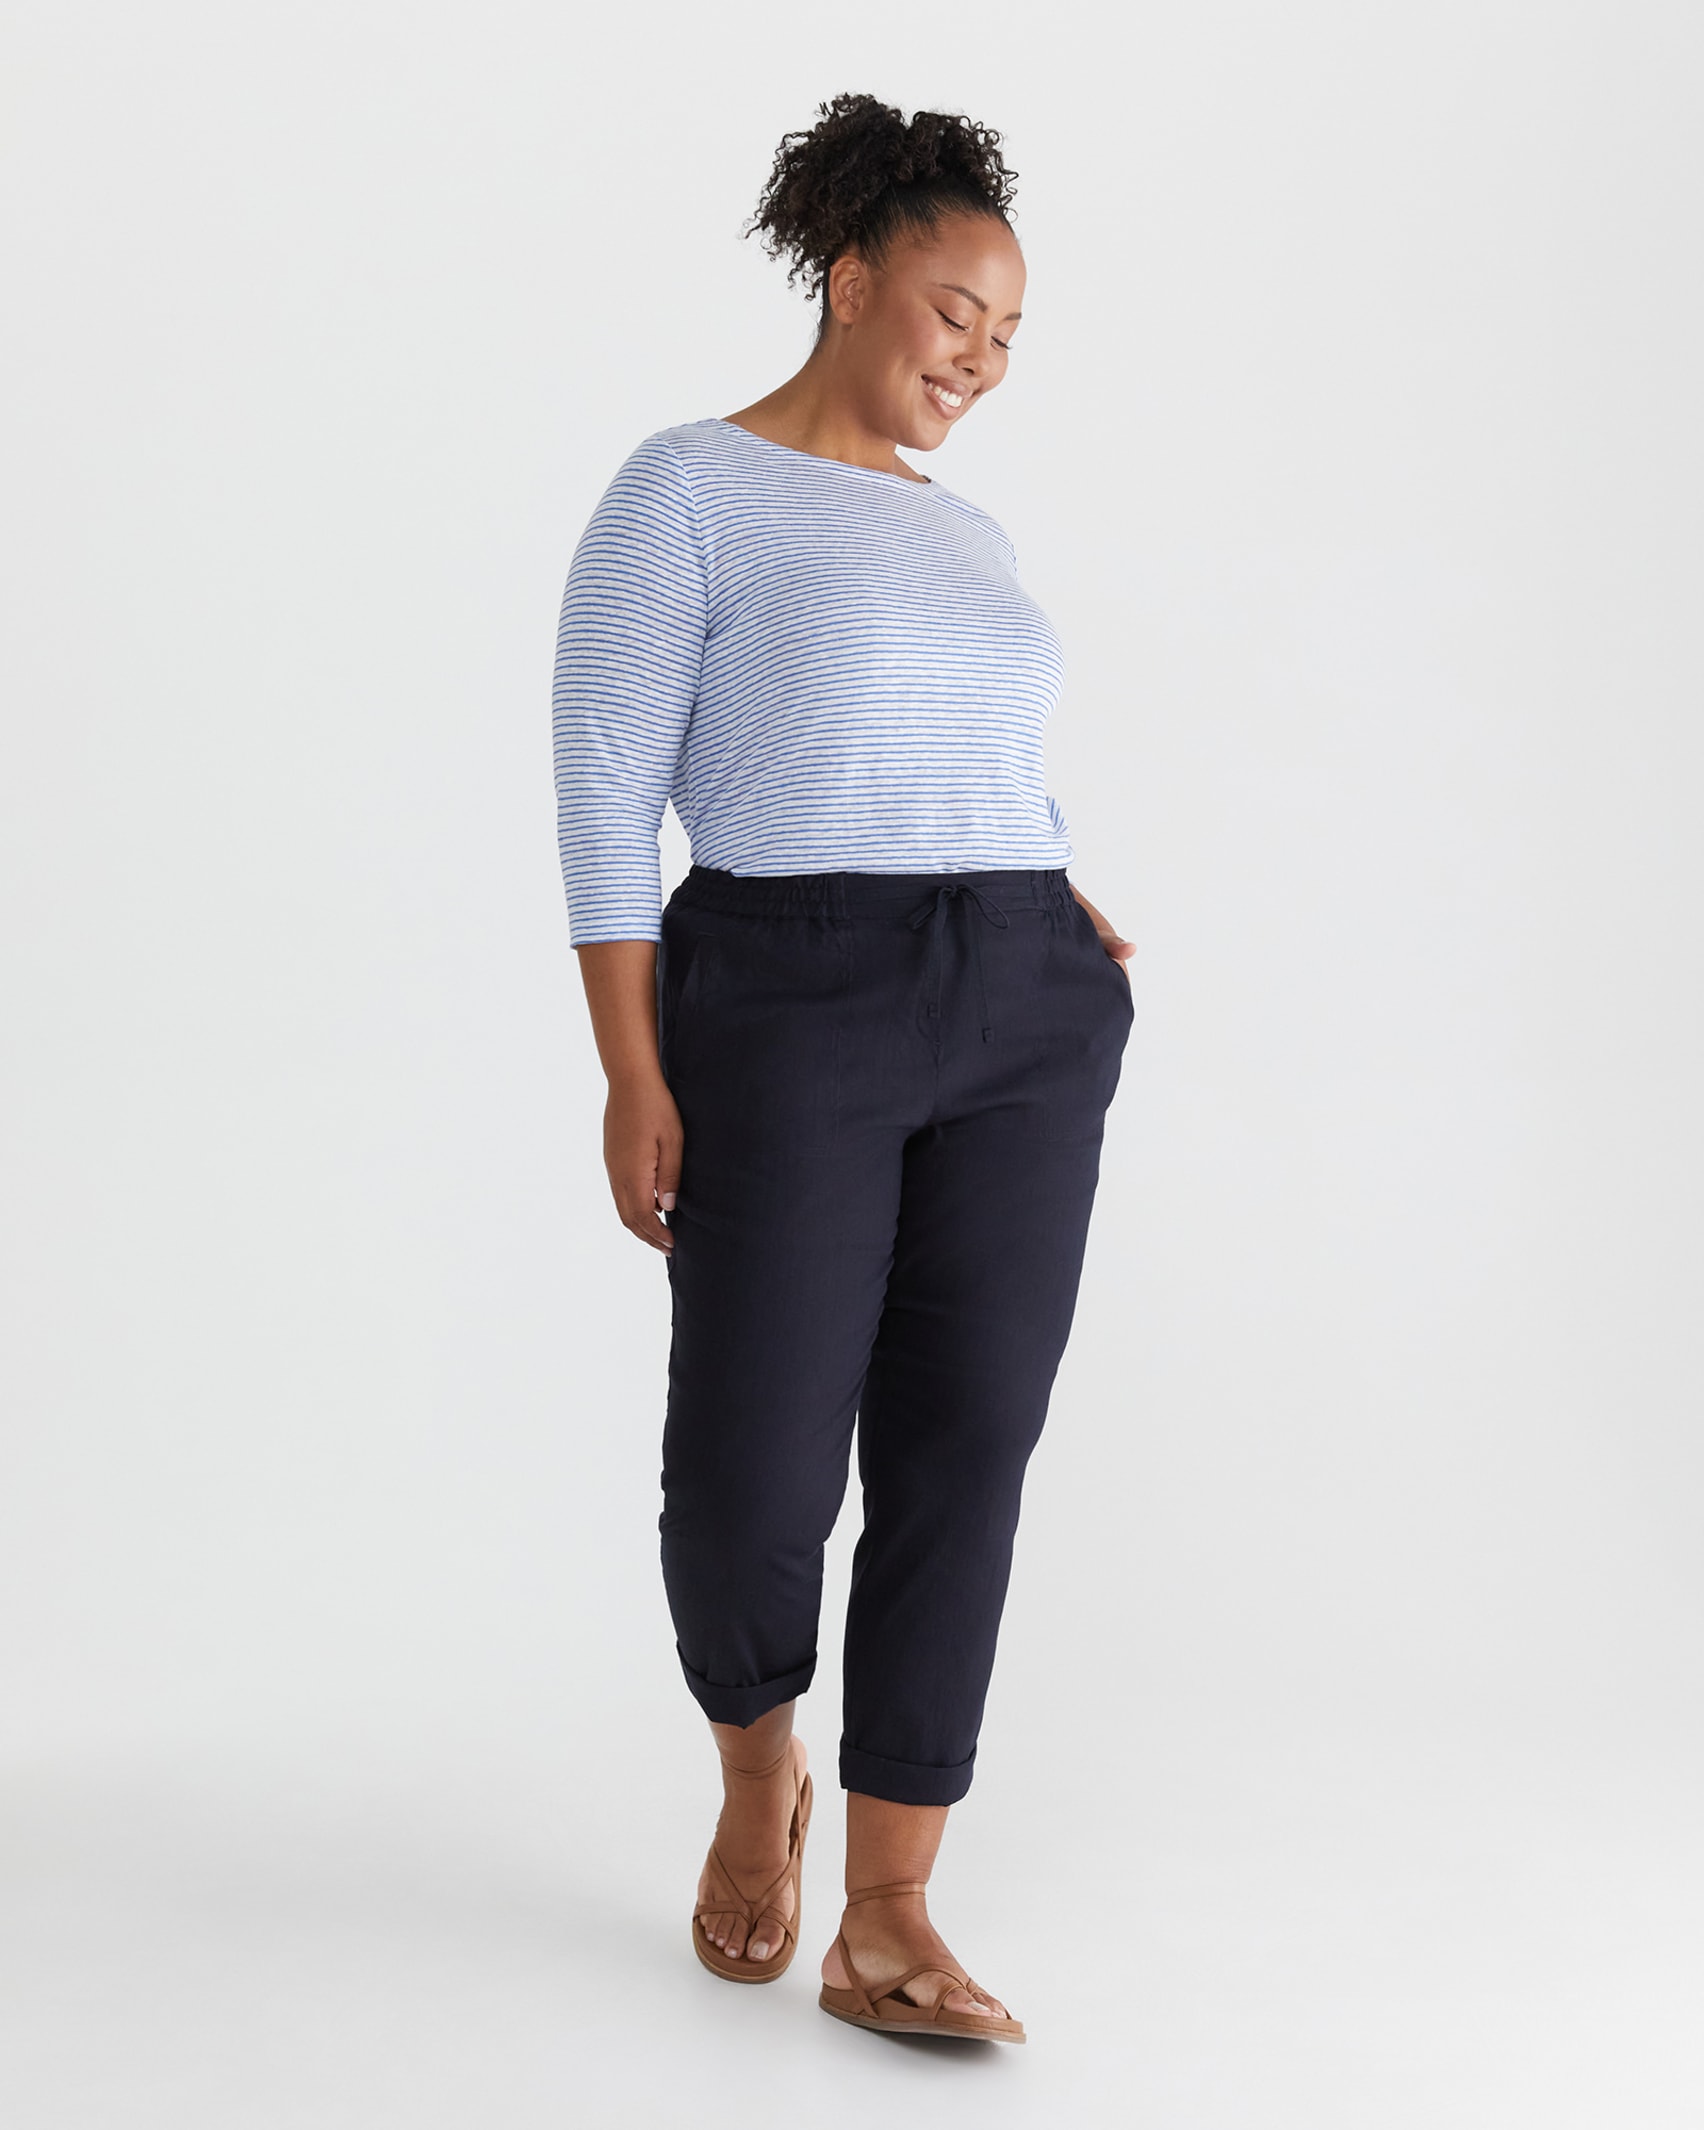 Rosa Linen Pant in CLASSIC NAVY